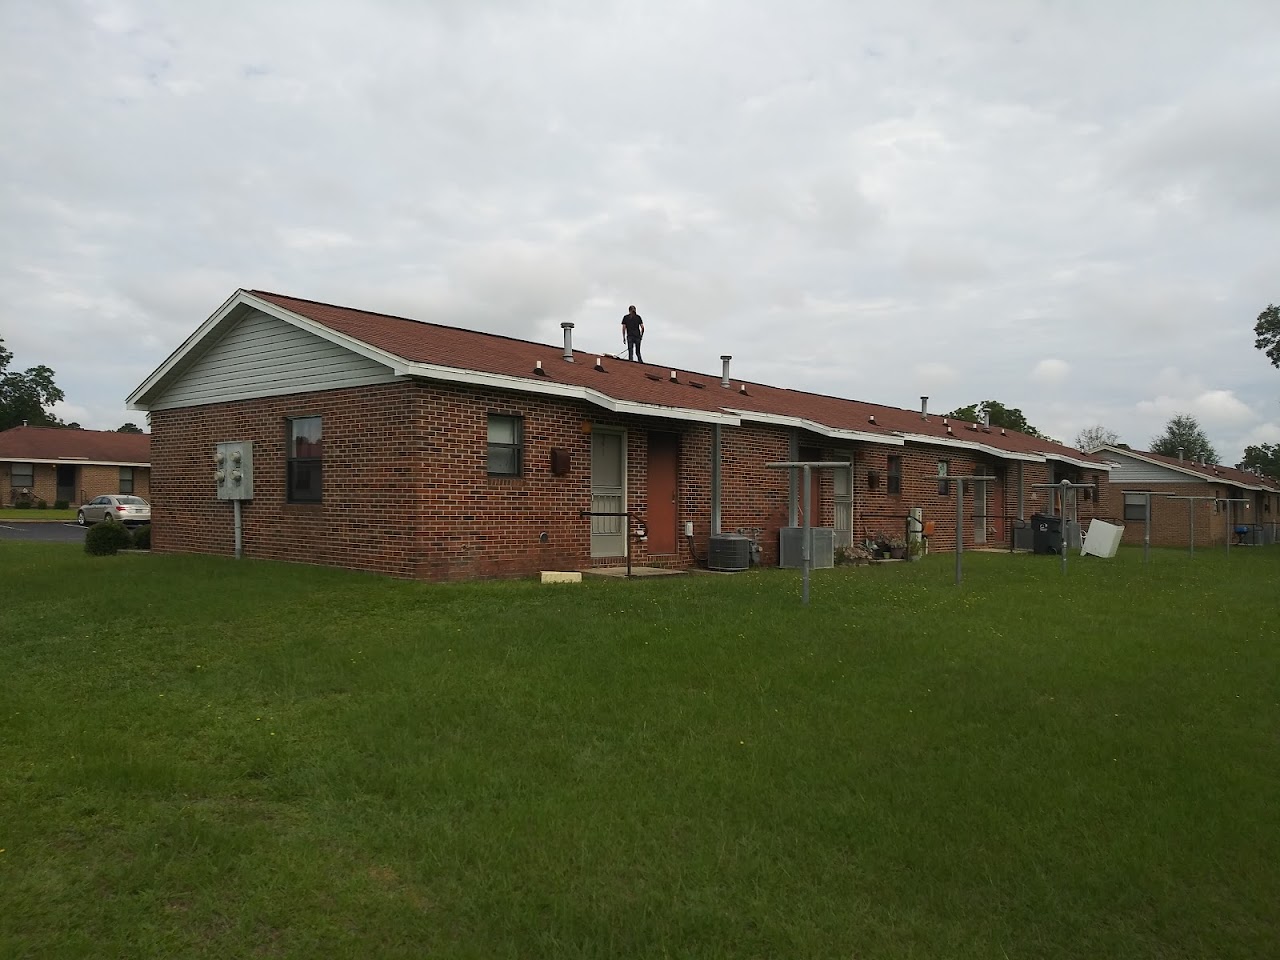 Photo of Housing Authority of the City of Wrightsville. Affordable housing located at P.O. Box 190 WRIGHTSVILLE, GA 31096